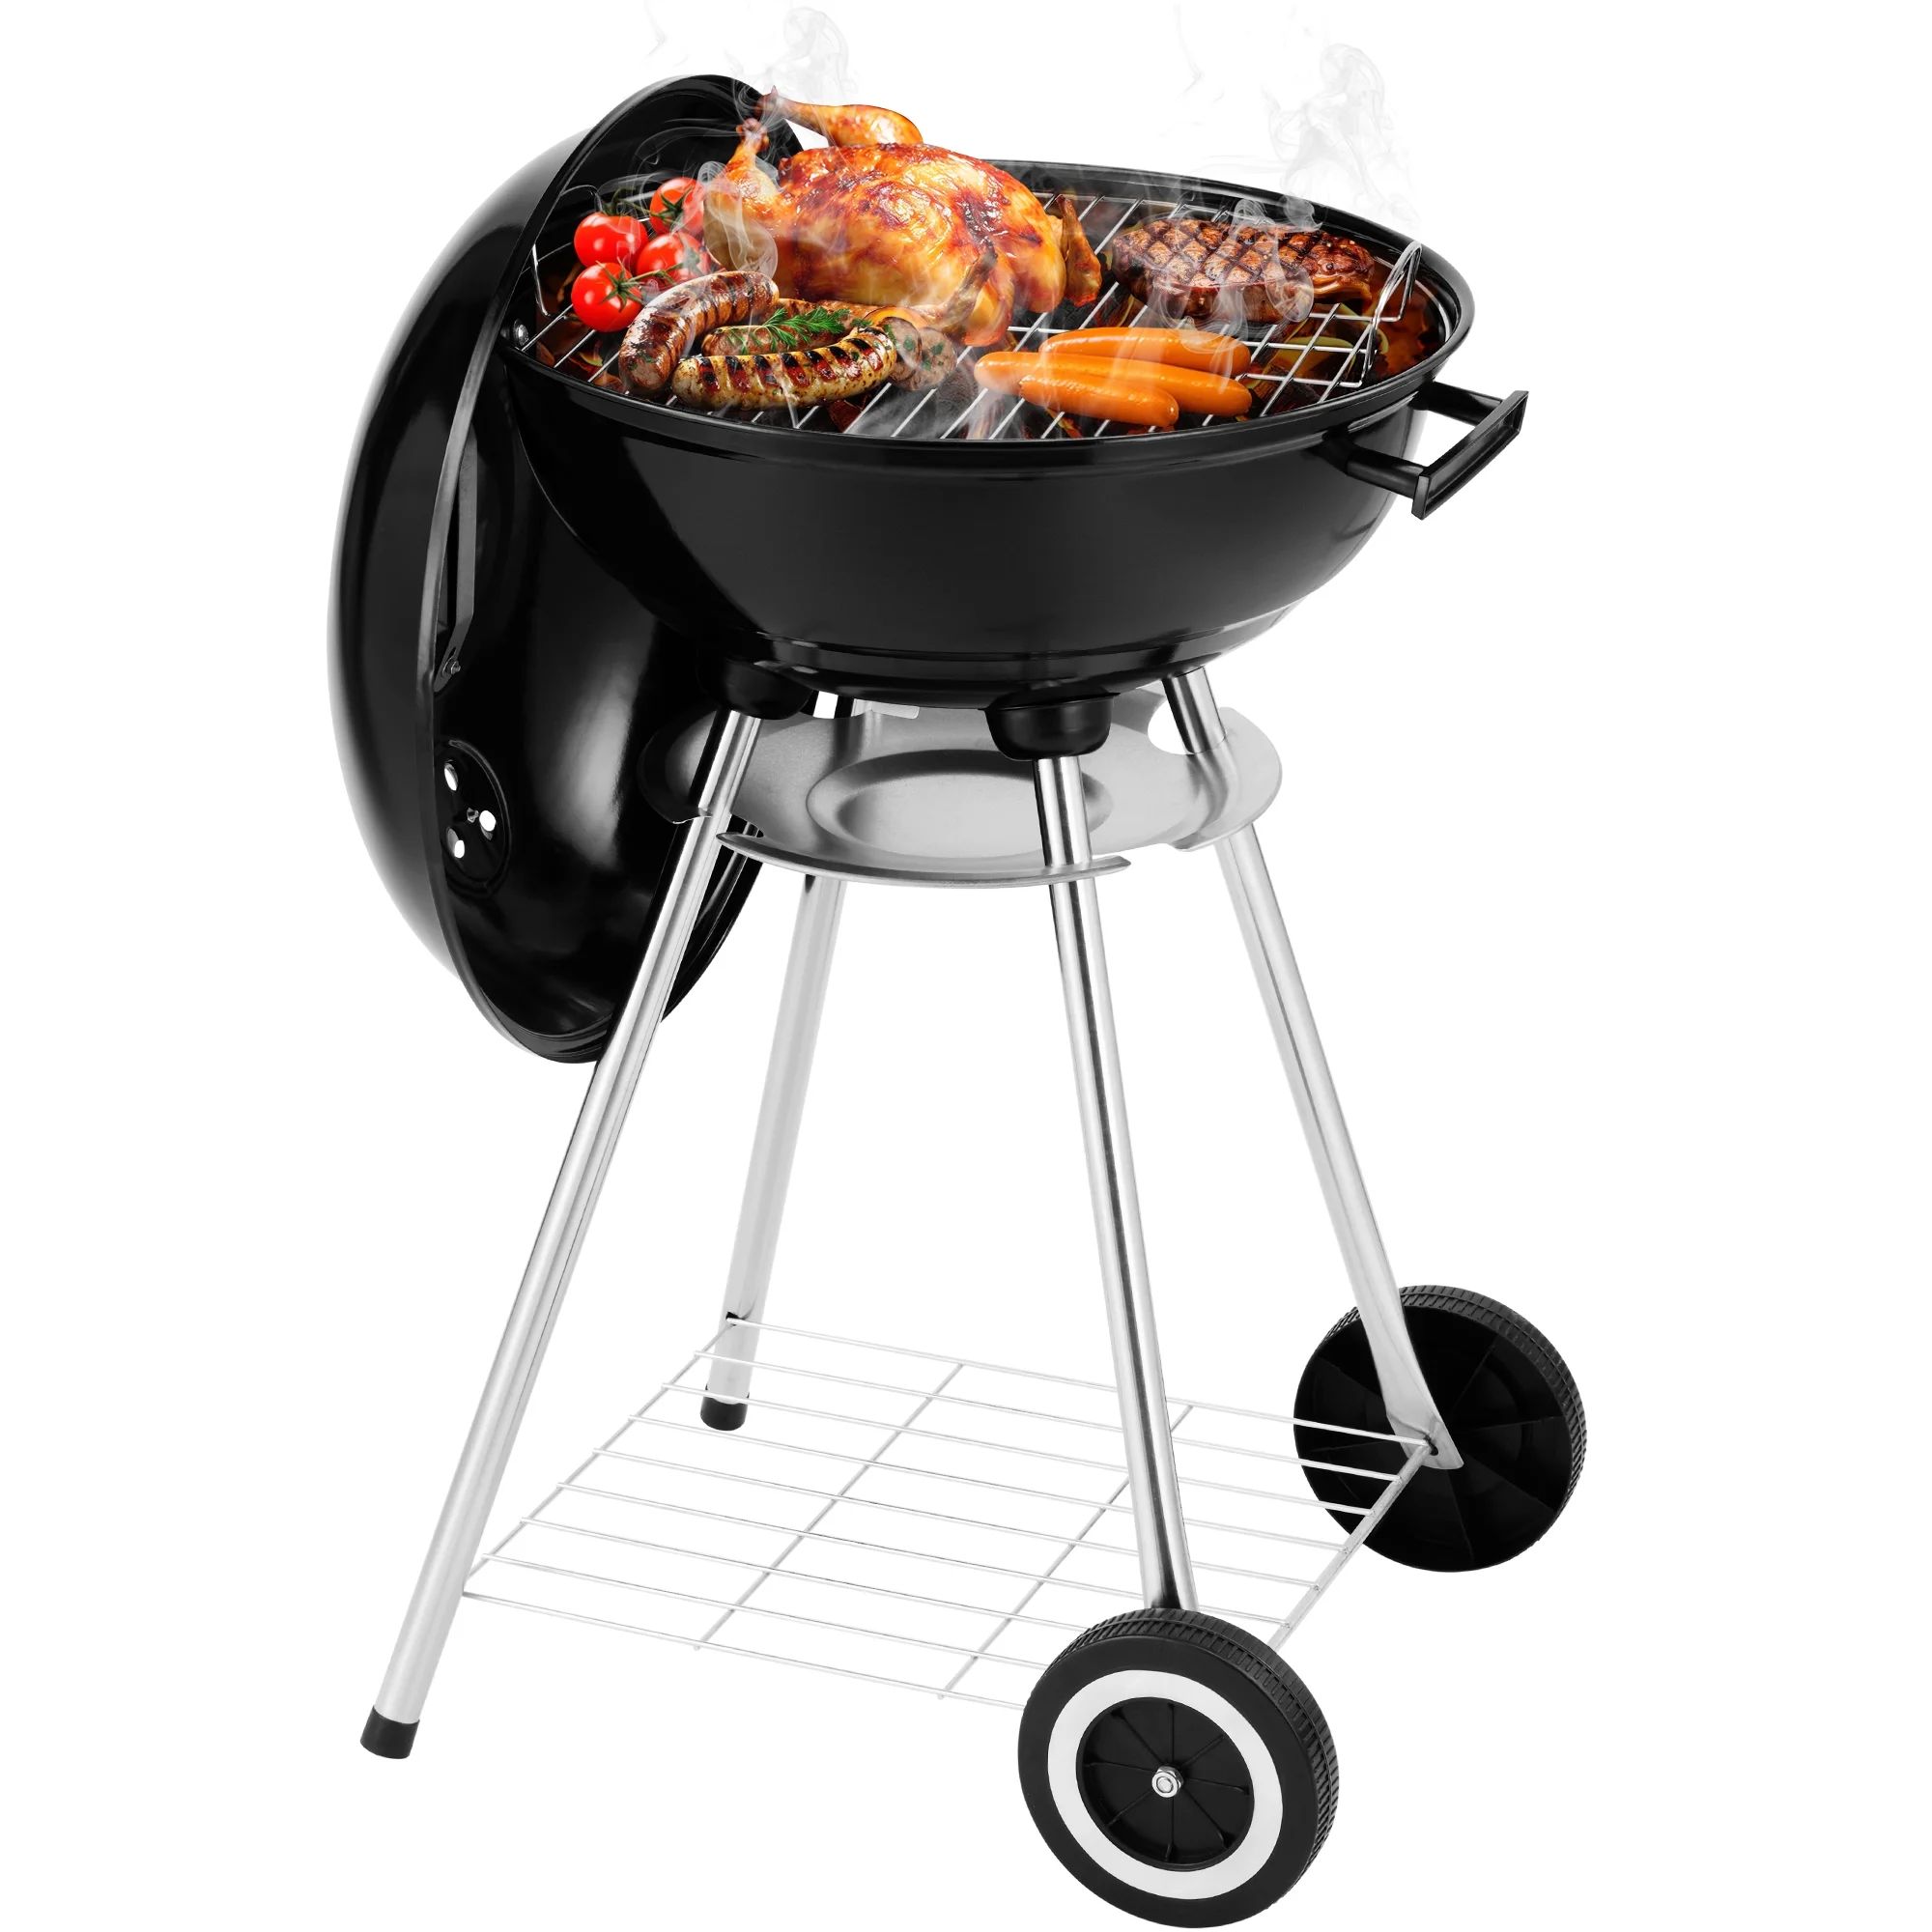 Segmart Kettle Charcoal Grill, 18 Inch Portable Camping BBQ Grill with Wheels for Outdoor Cooking... | Walmart (US)